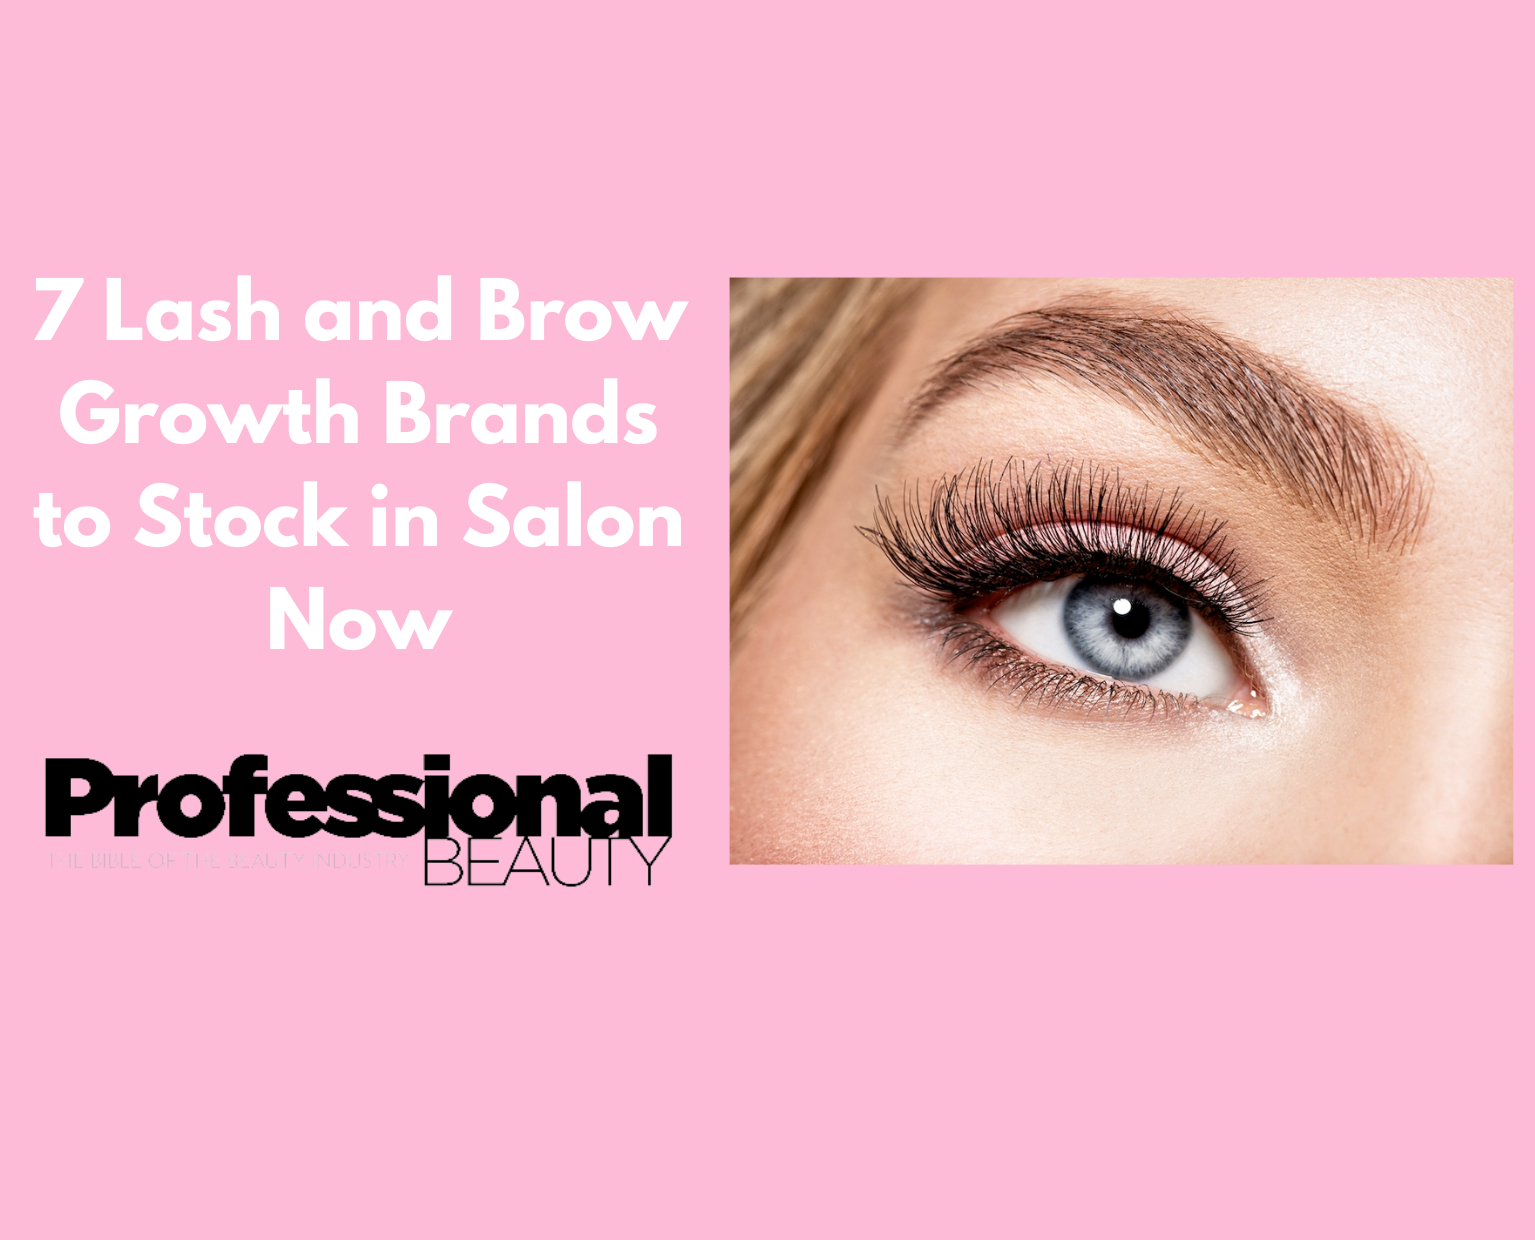 7 Lash and Brow Growth Brands to Stock in Salon Now